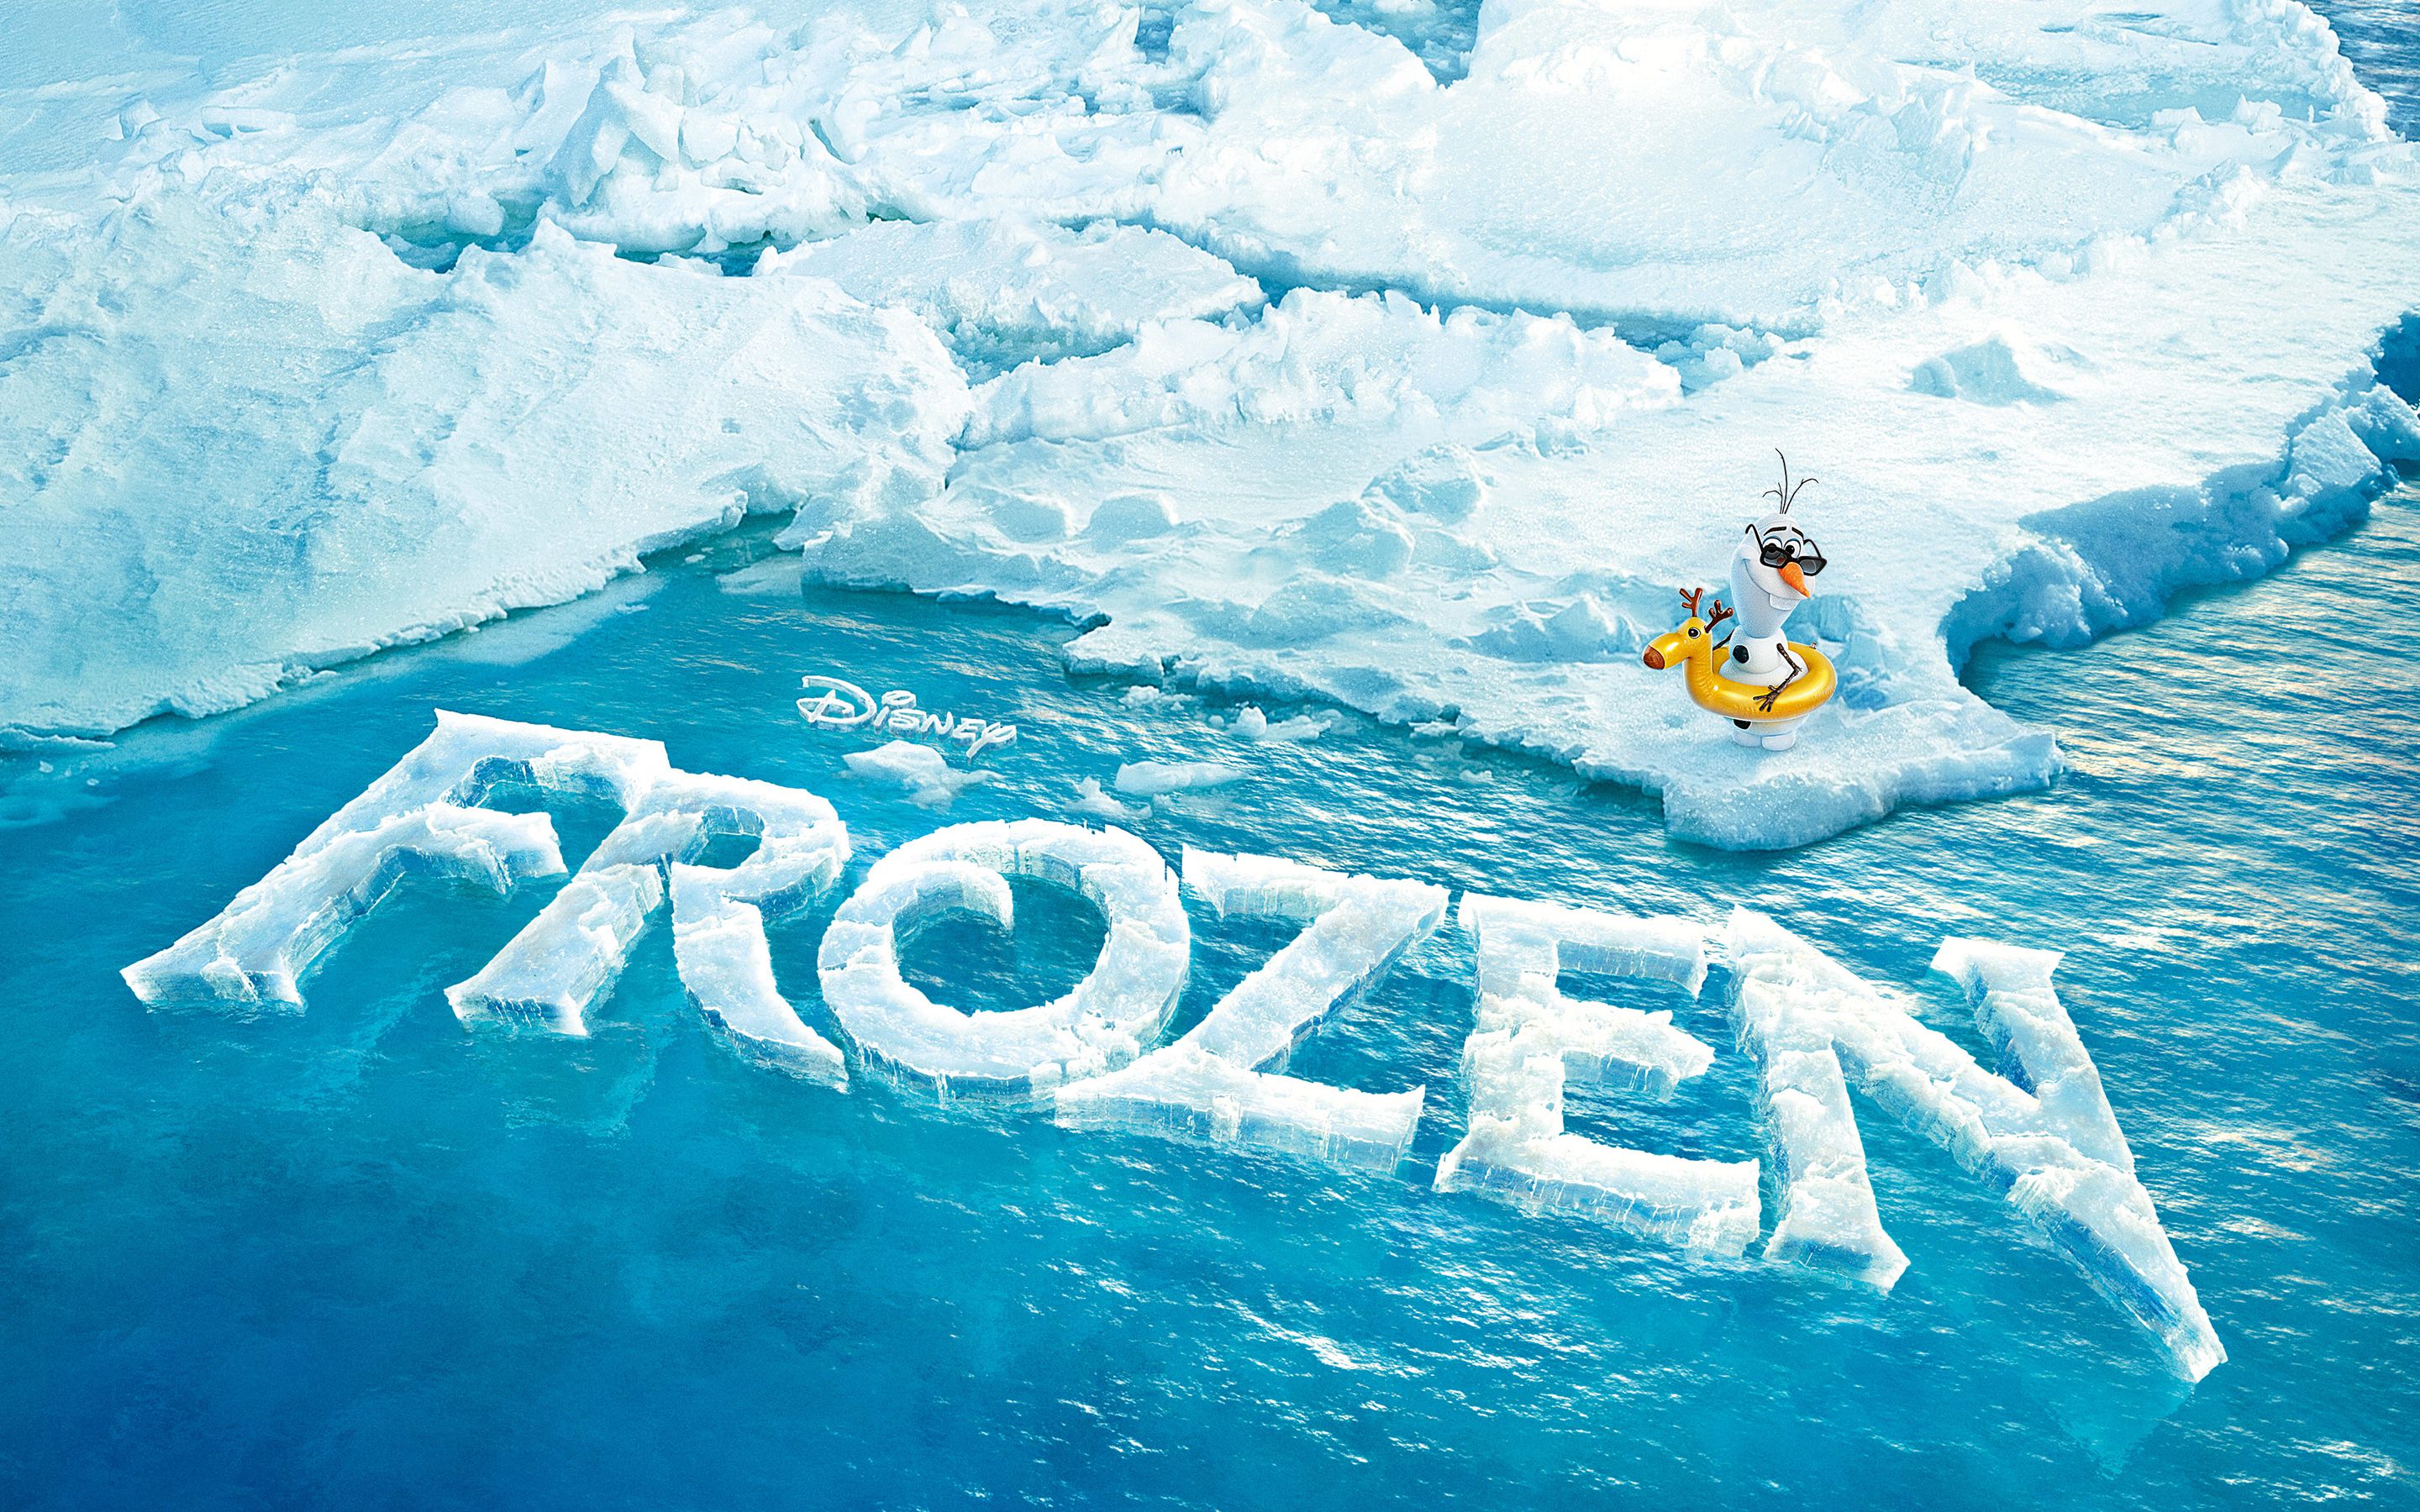 Download Frozen Full HD Wallpapers For Your Mobile and Desktop-5